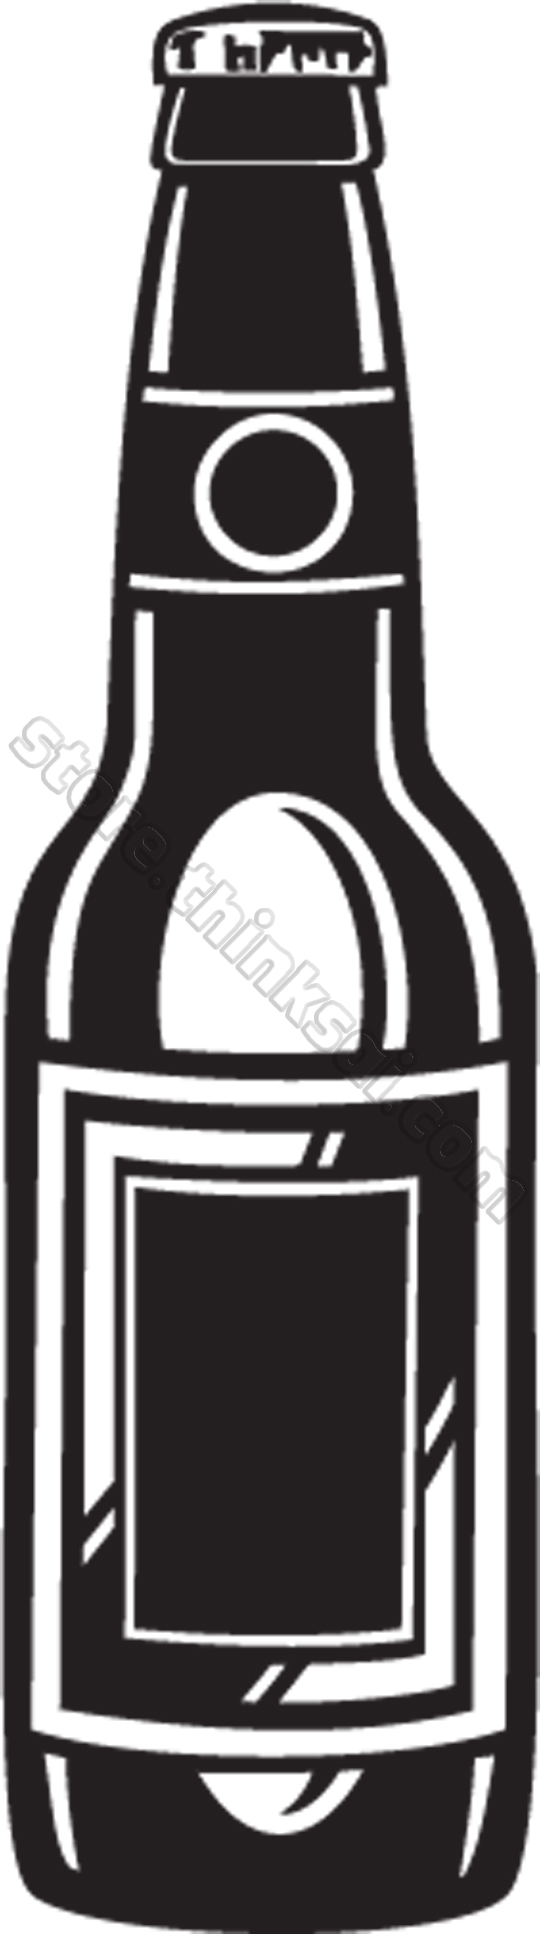 free beer can clipart - photo #47